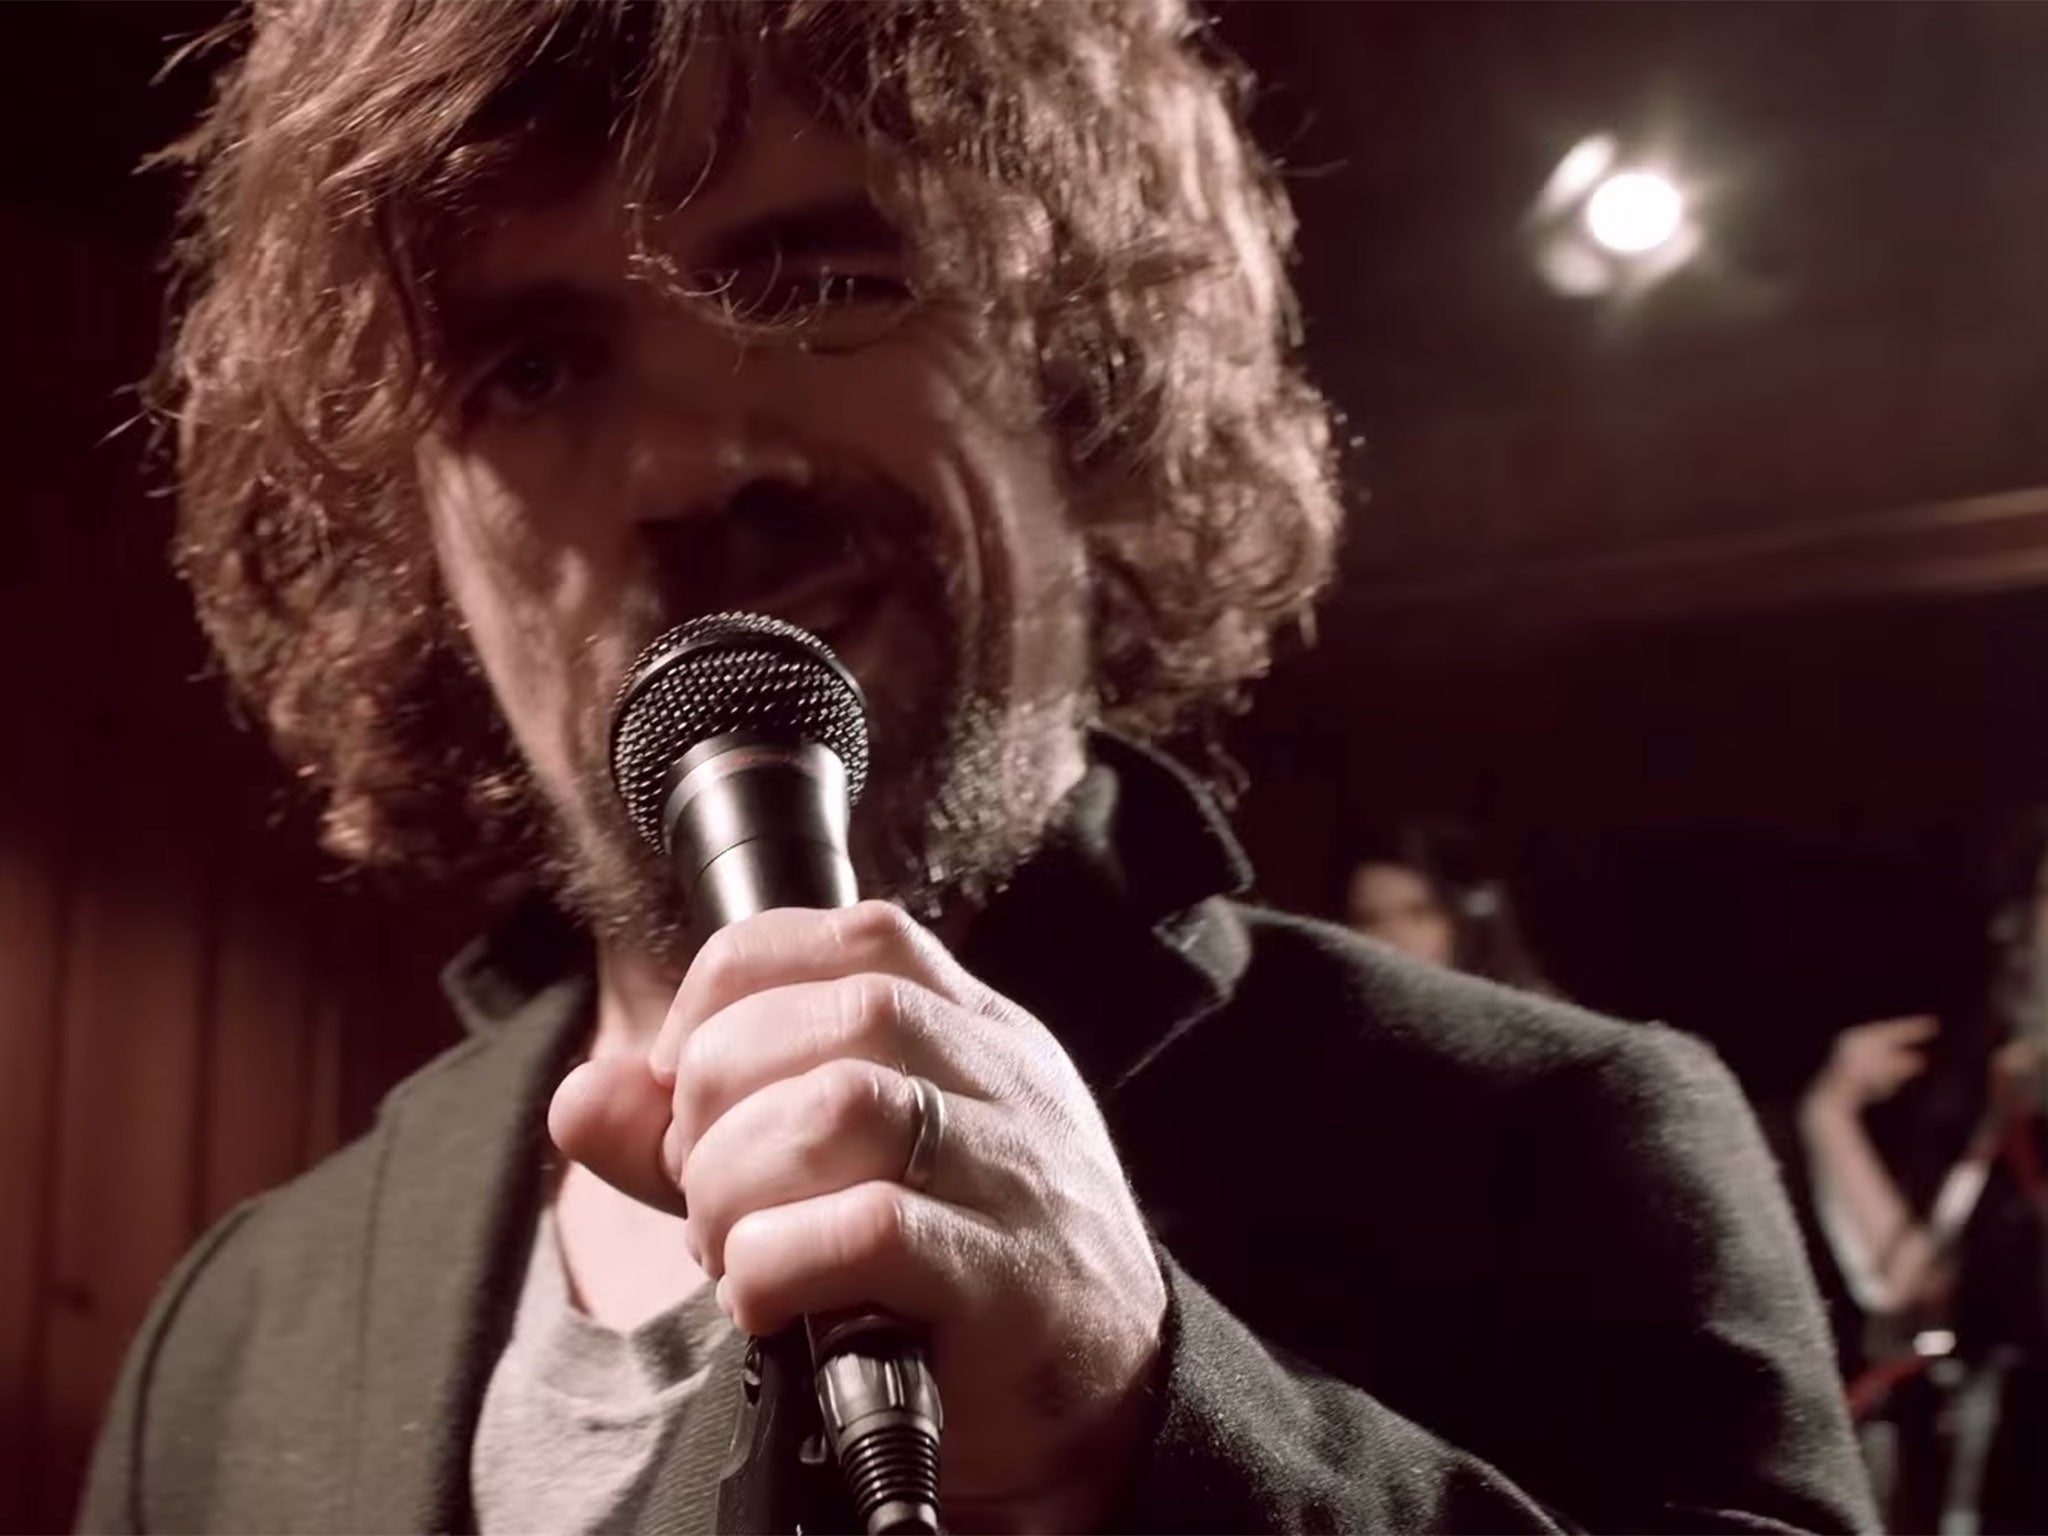 Peter Dinklage plays Tyrion Lannister in Game of Thrones and now he's joined the musical